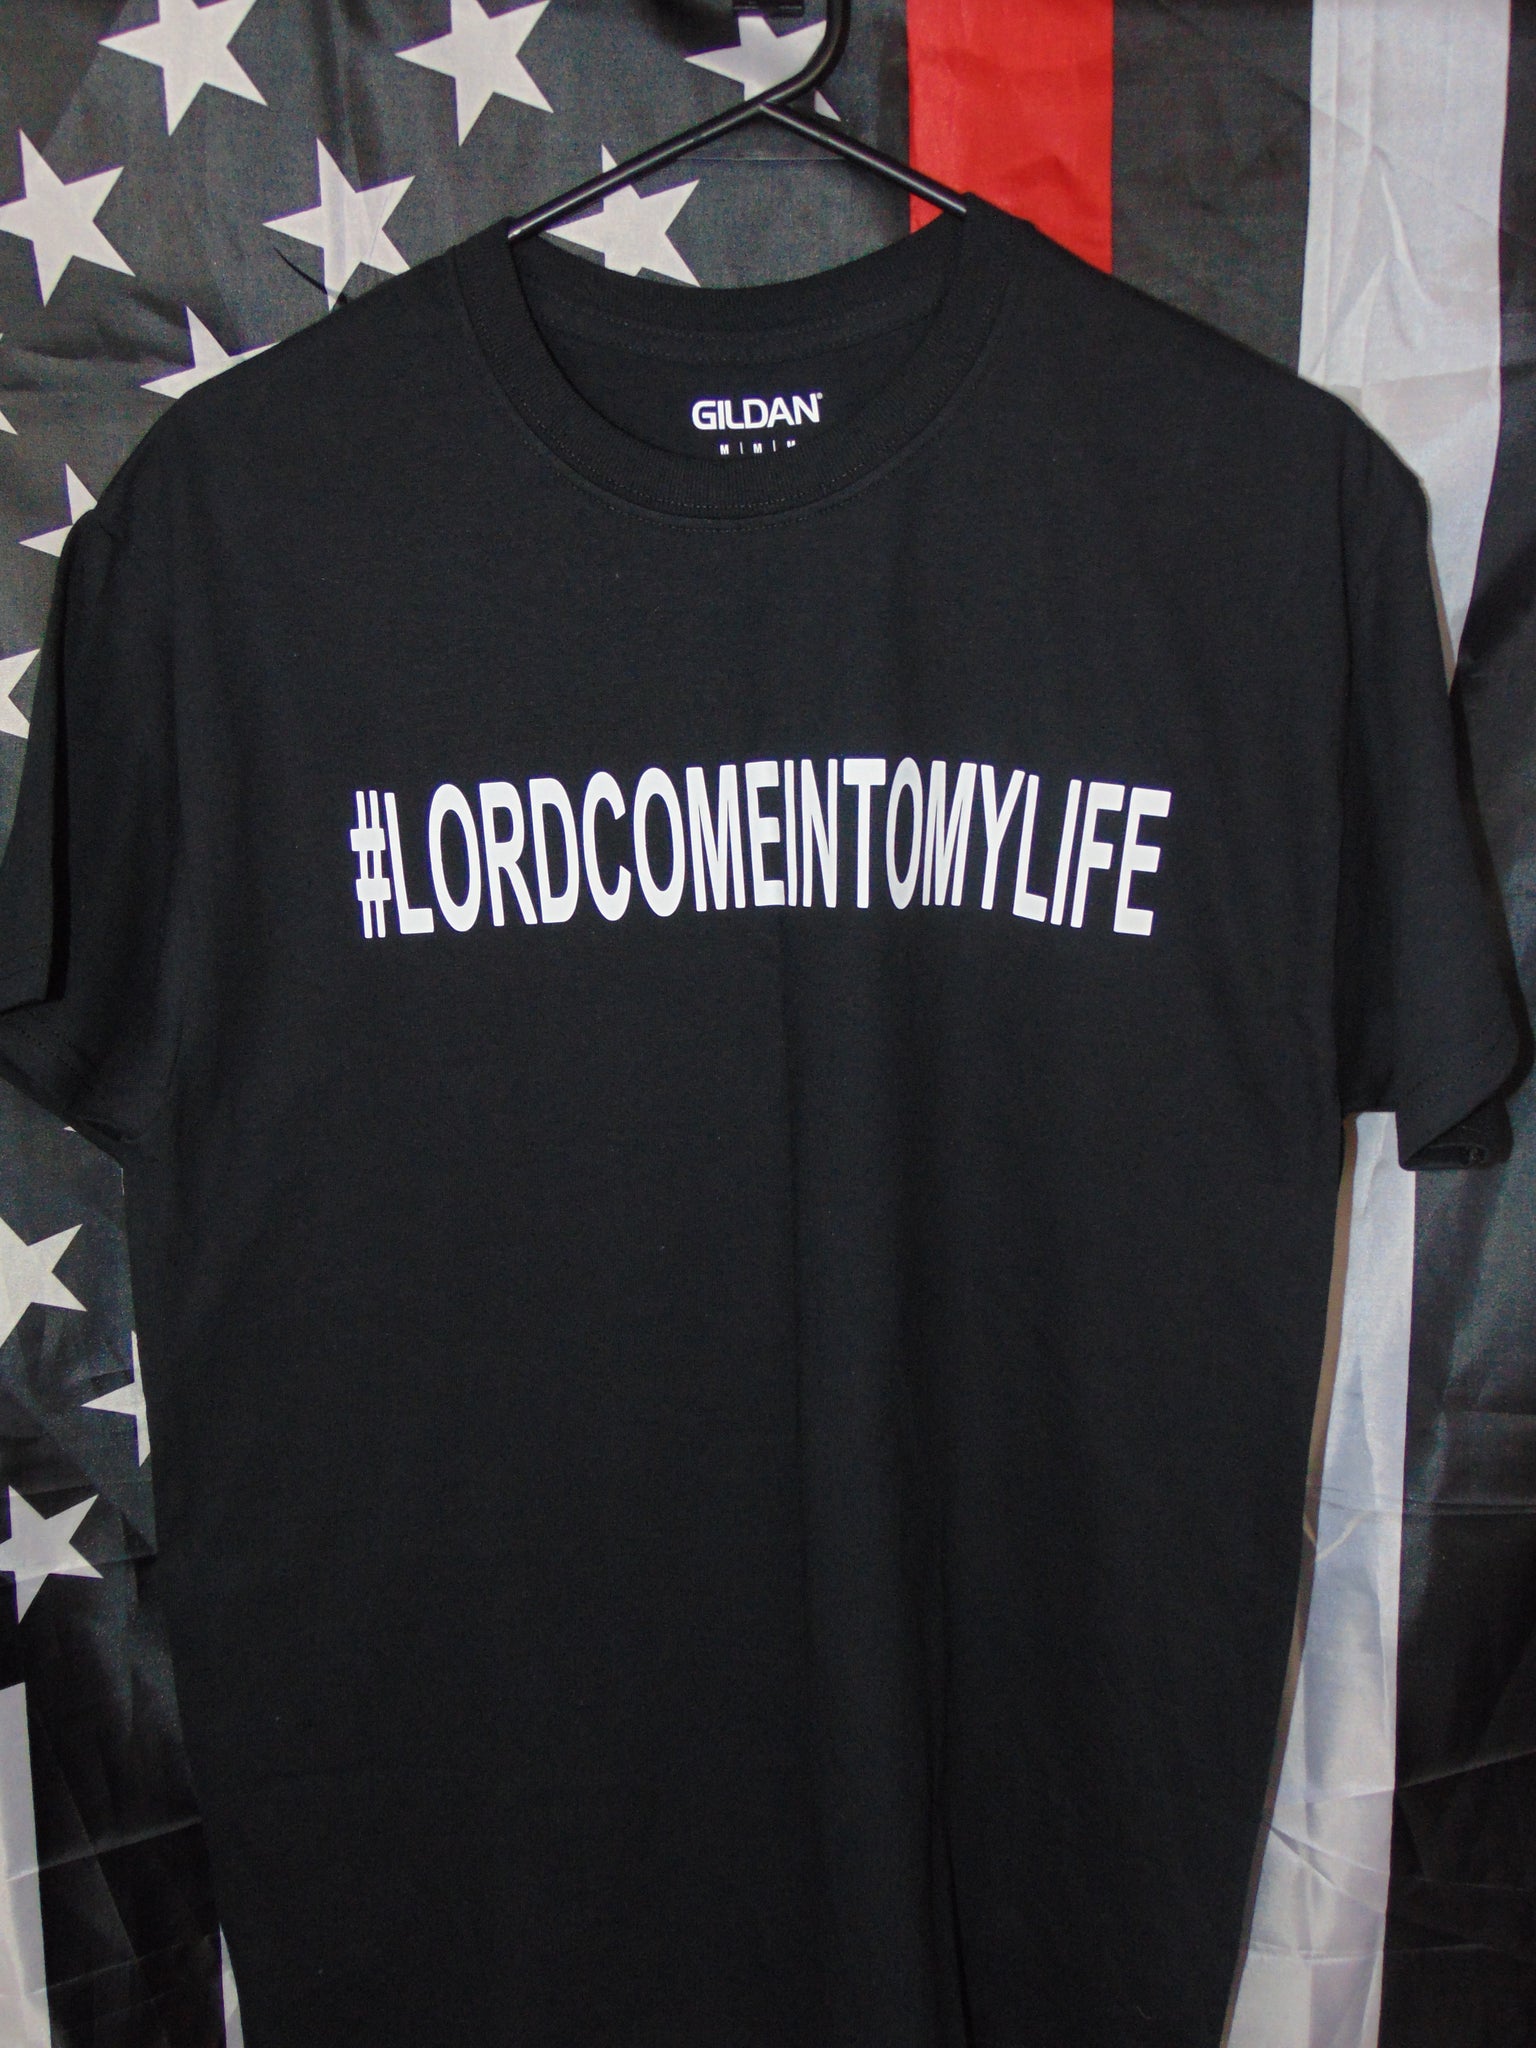 New Lord come into my life t-shirts